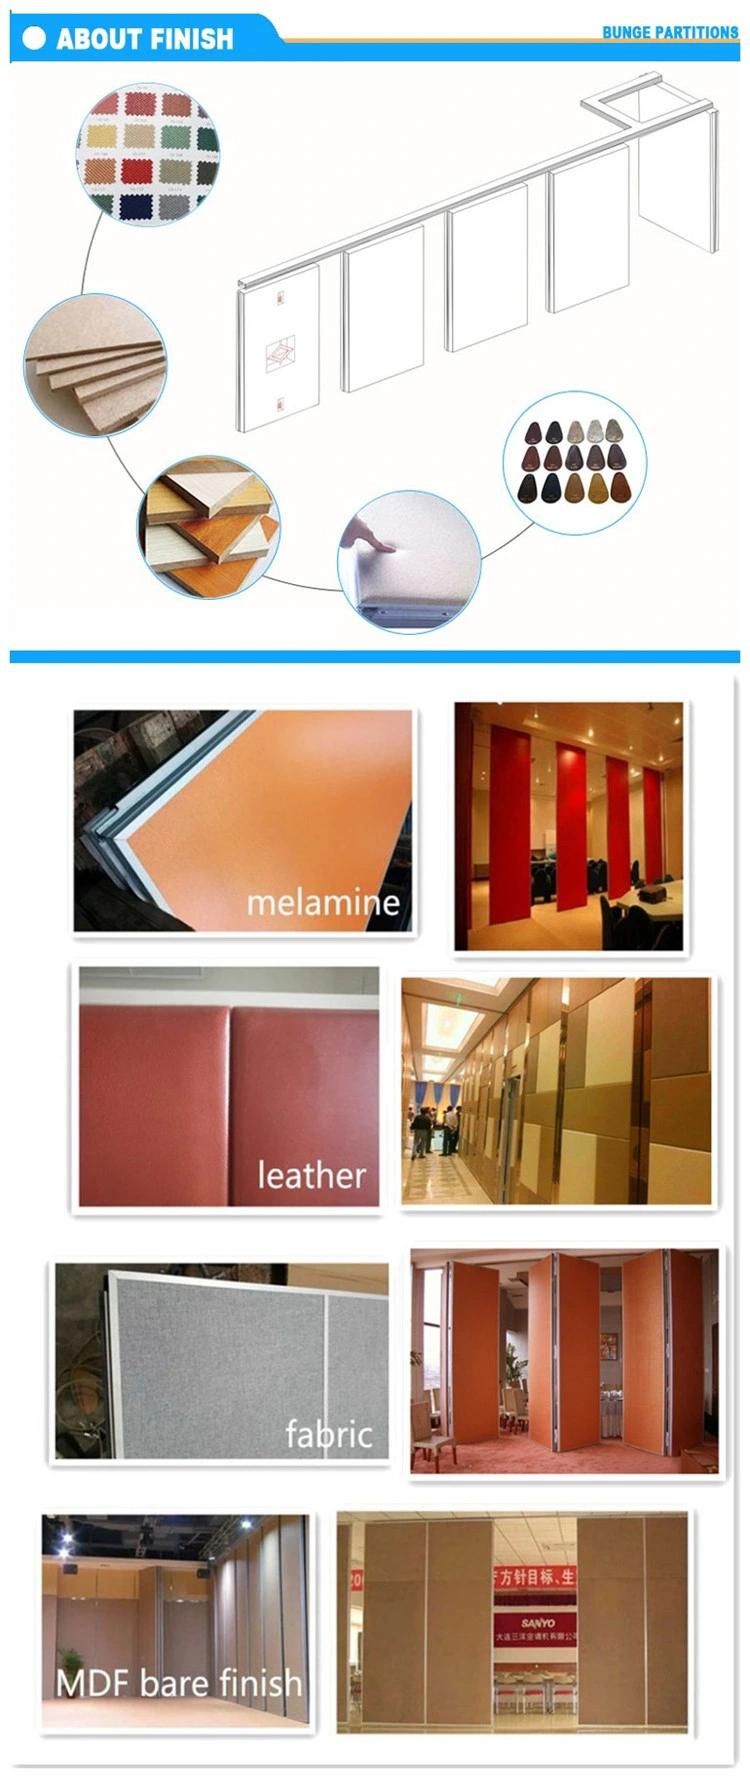 Mobile Walls Partition Wall Shutter Acoustical Partition Walls for Hotel Banquet Hall